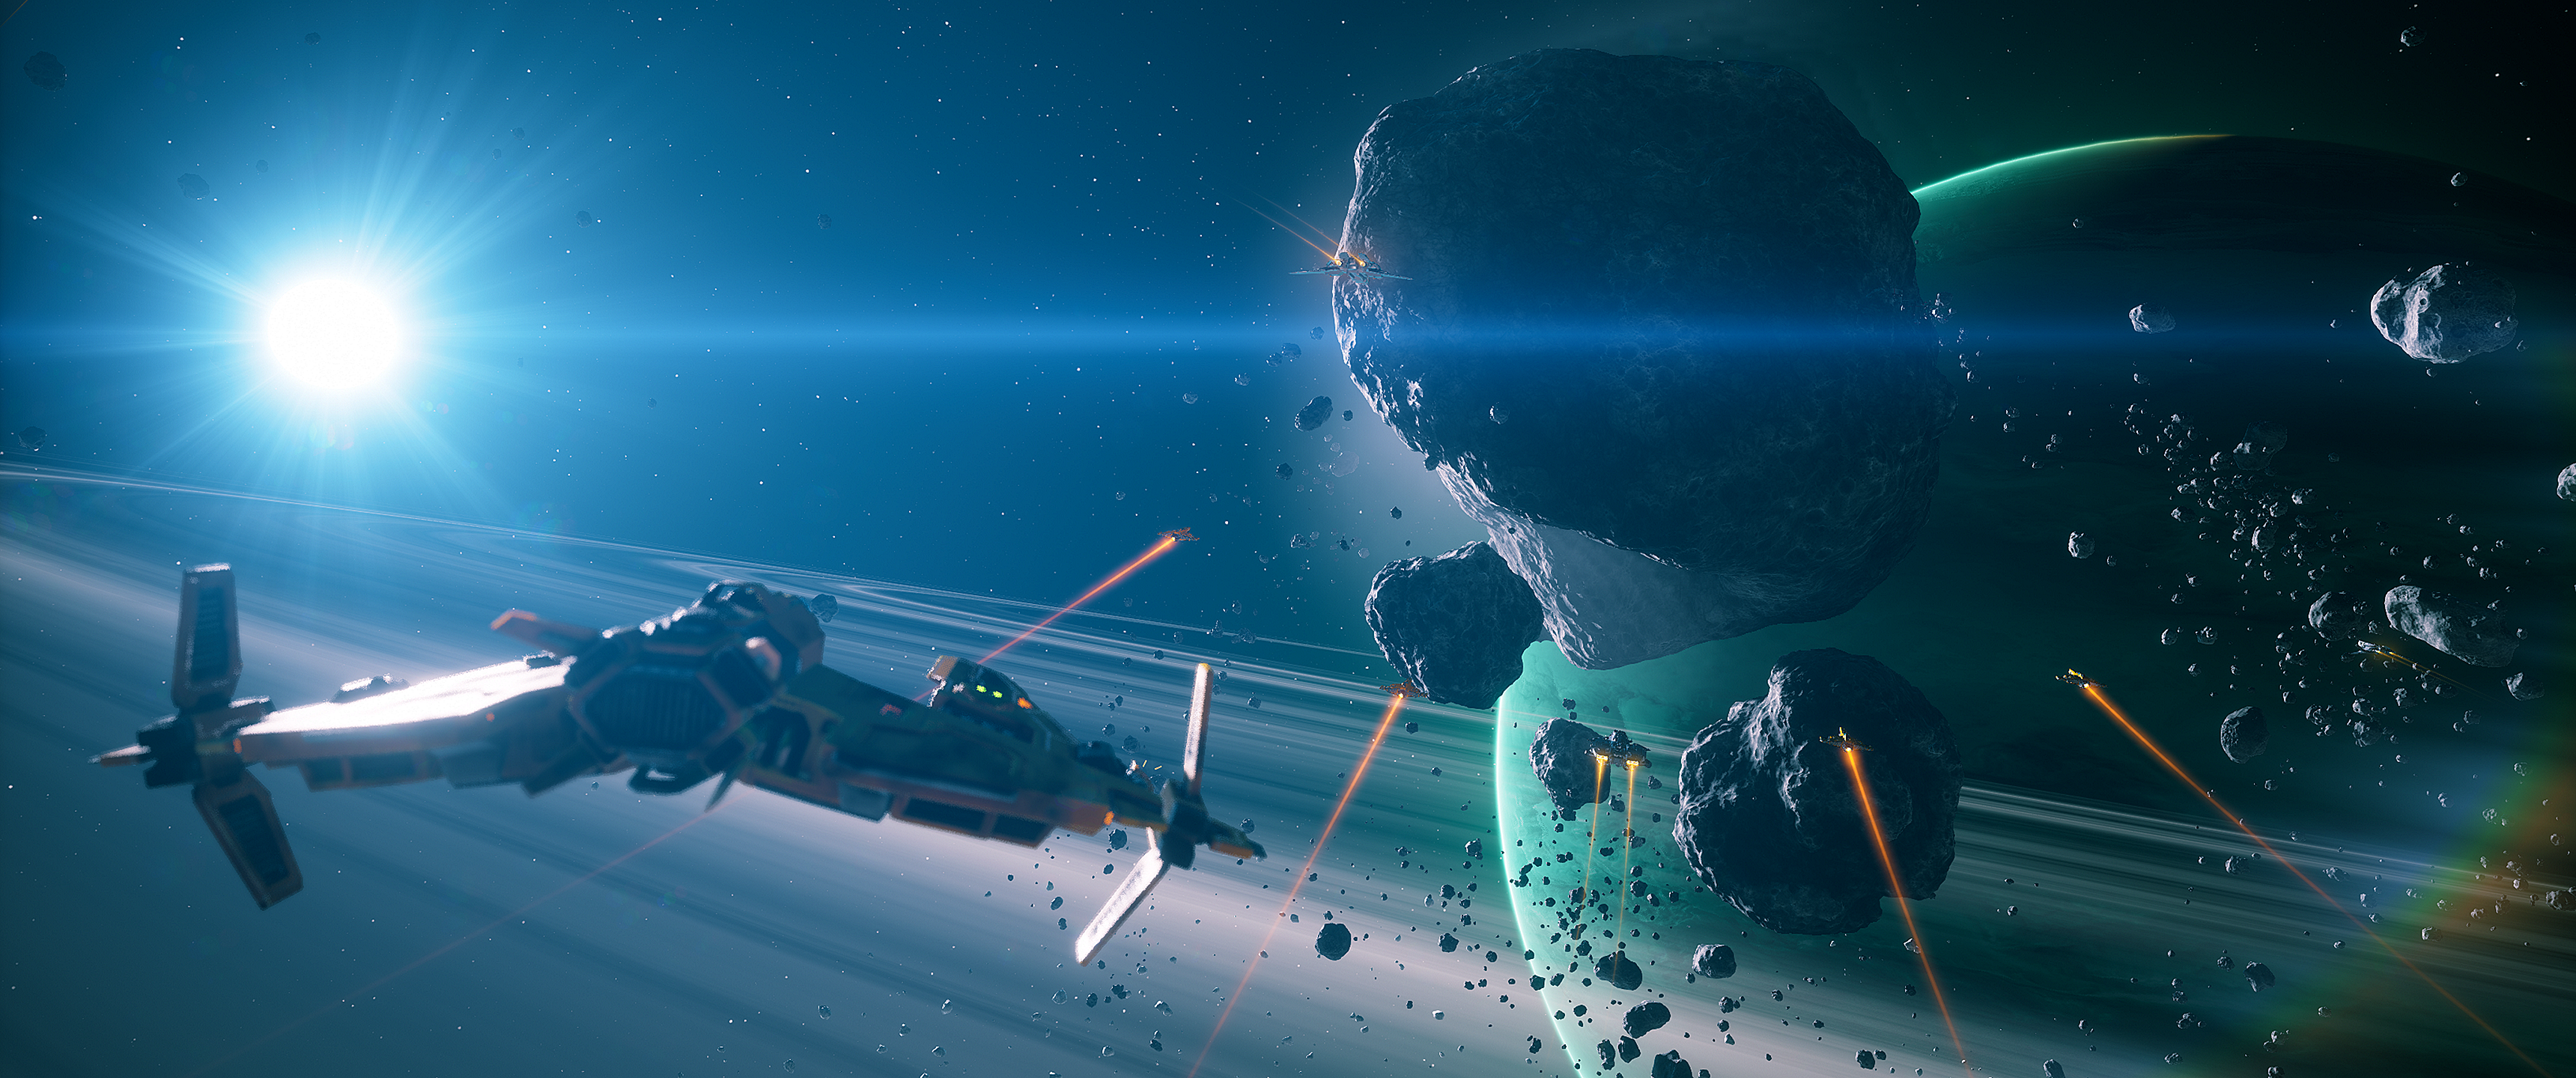 EVERSPACE-2-24-10-21-3-39-23-PM-edit.png